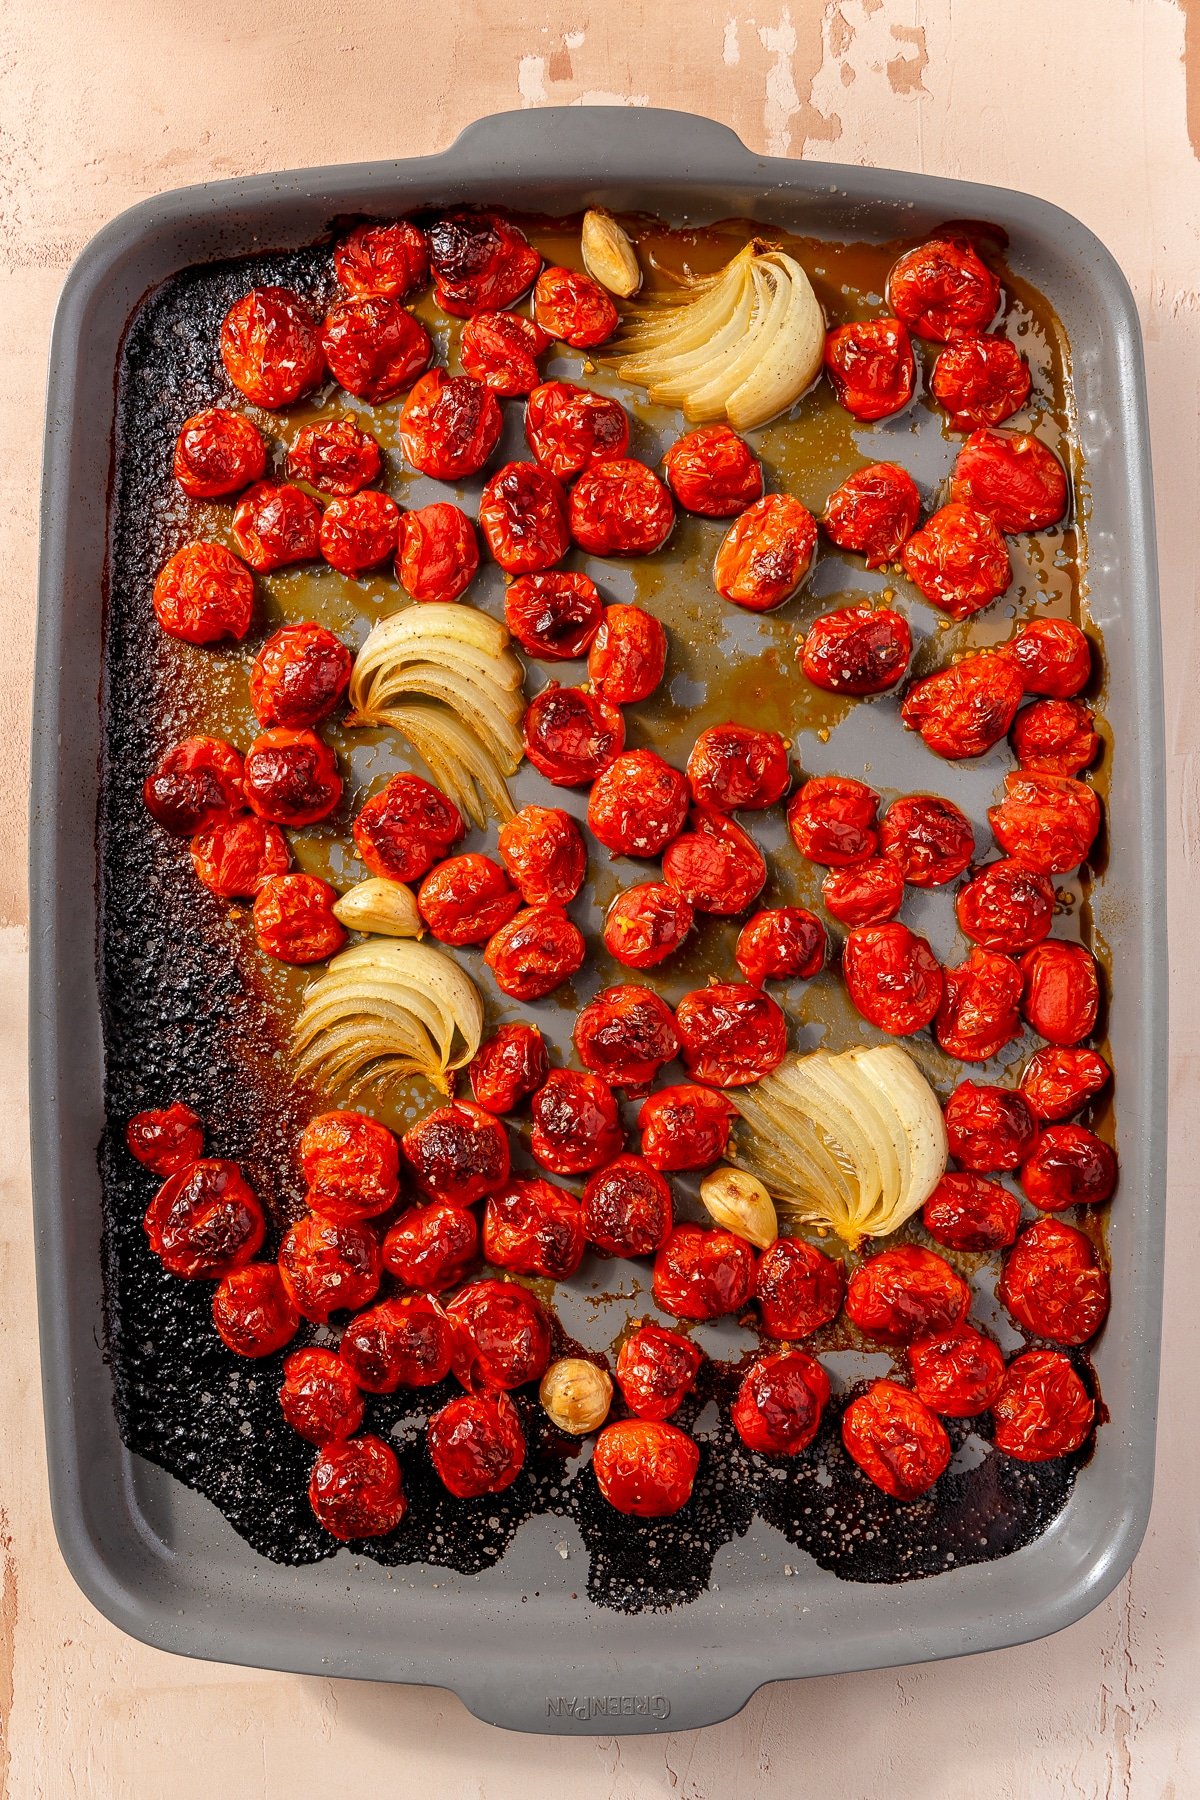 Fully baked tomatoes and onion sit on a metal baking tray.